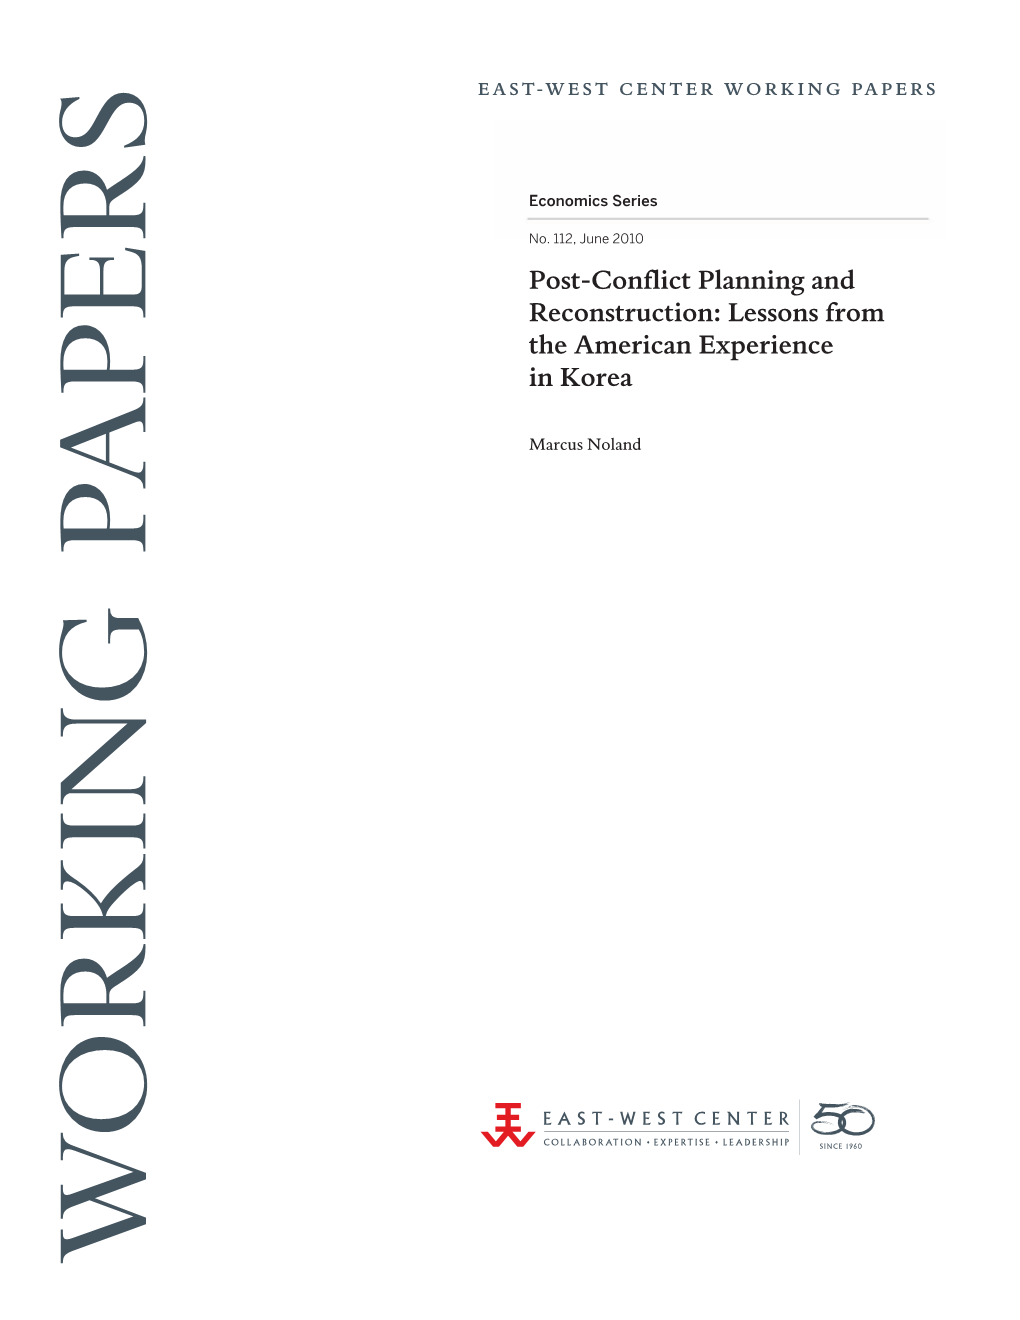 Post-Conflict Planning and Reconstruction: Lessons from the American Experience in Korea